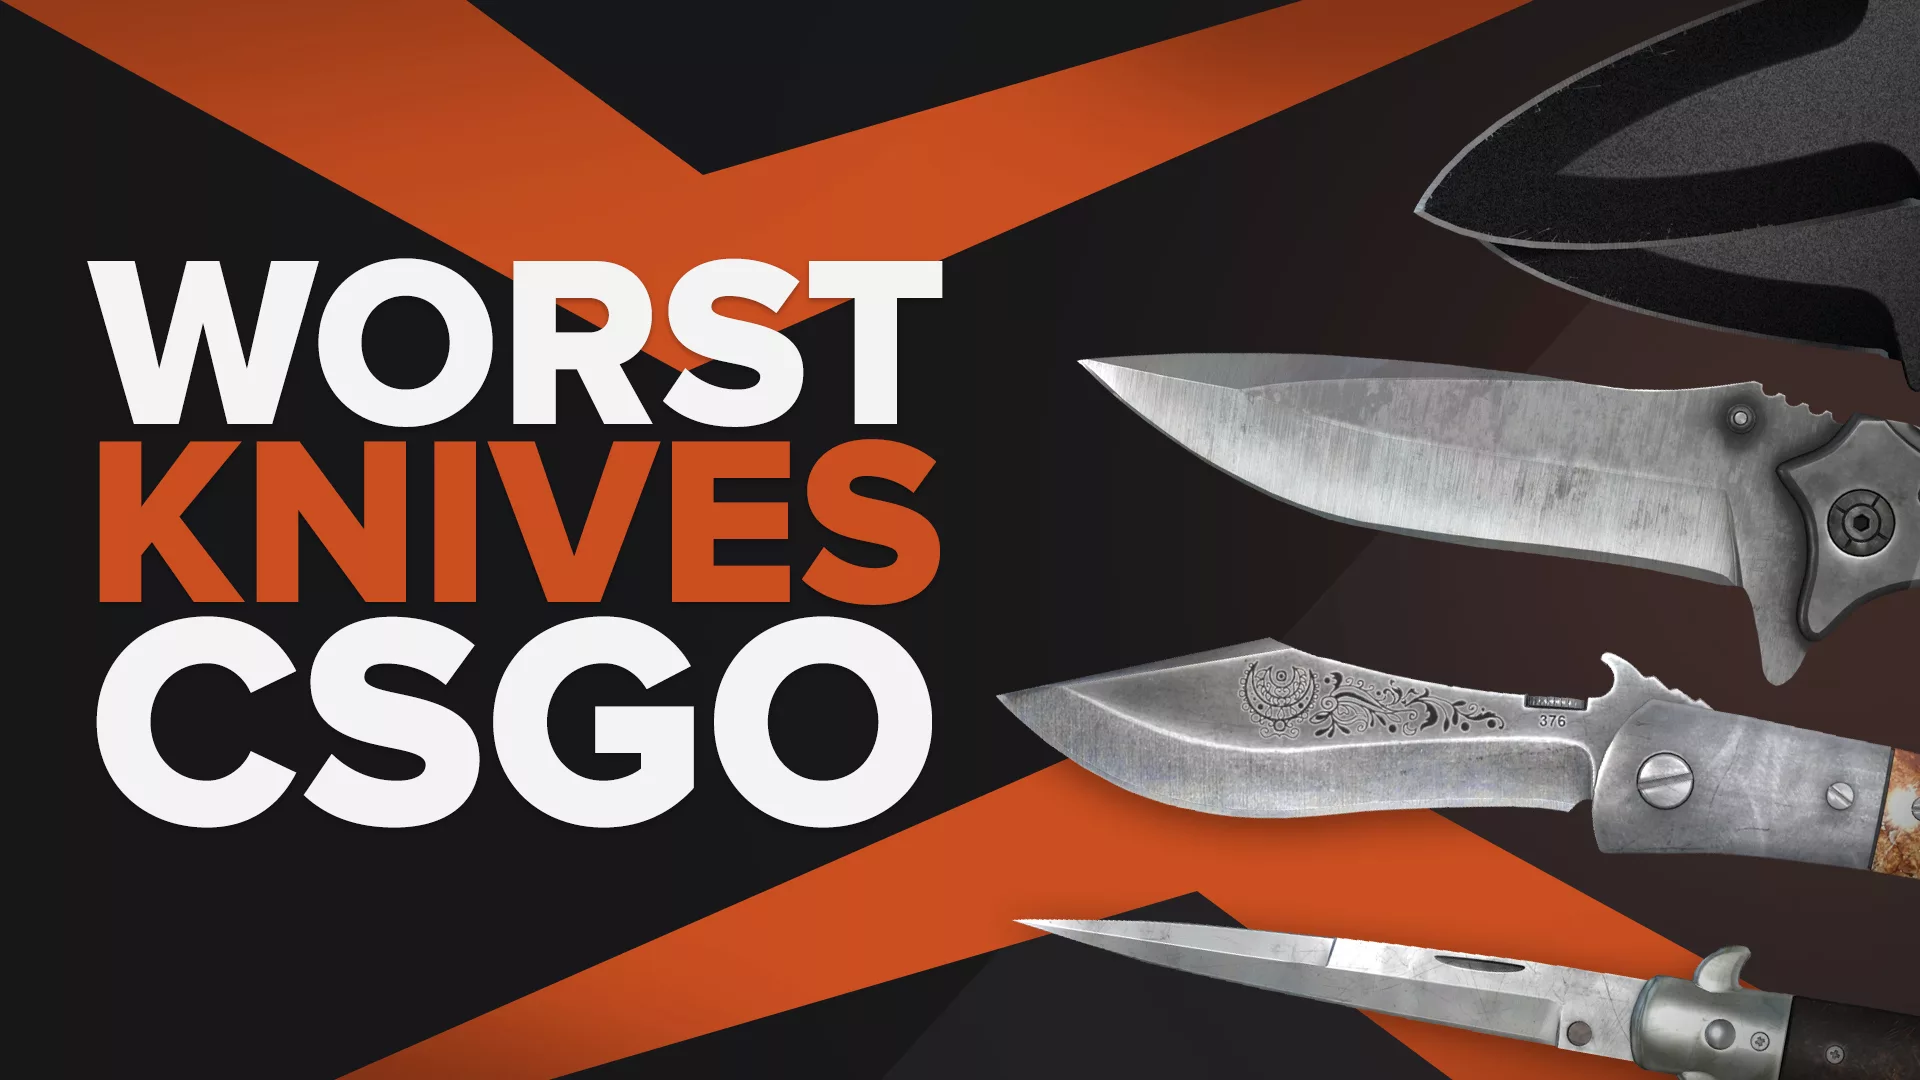 The Worst Knives in CSGO